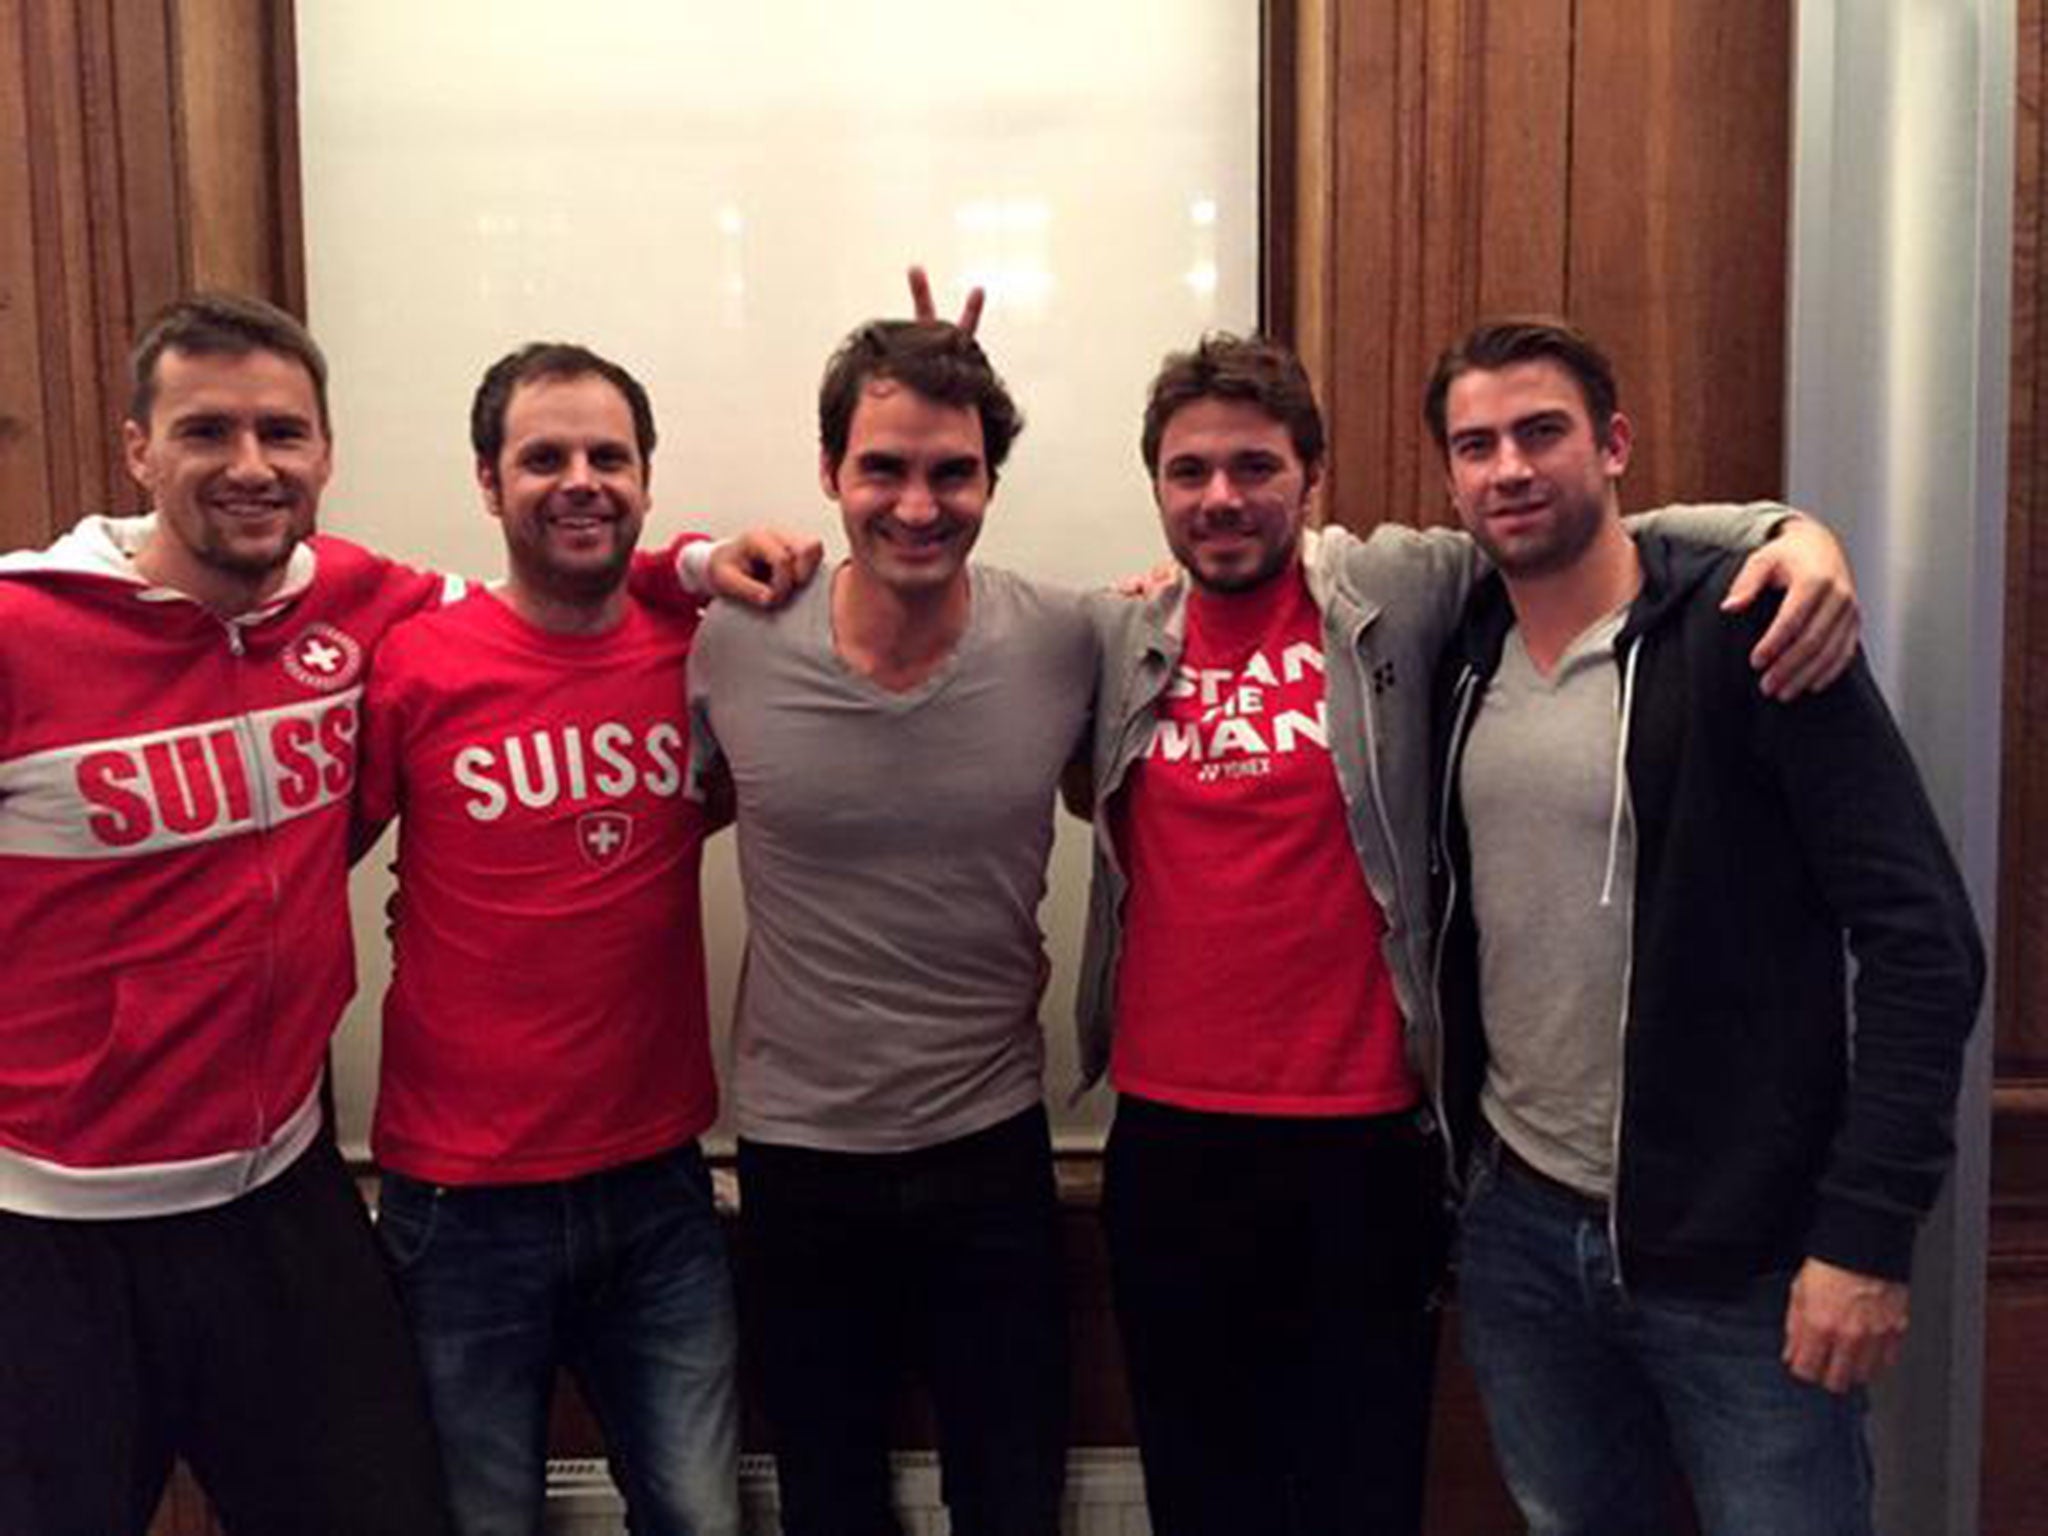 Roger Federer posted this picture of the Swiss Davis Cup team